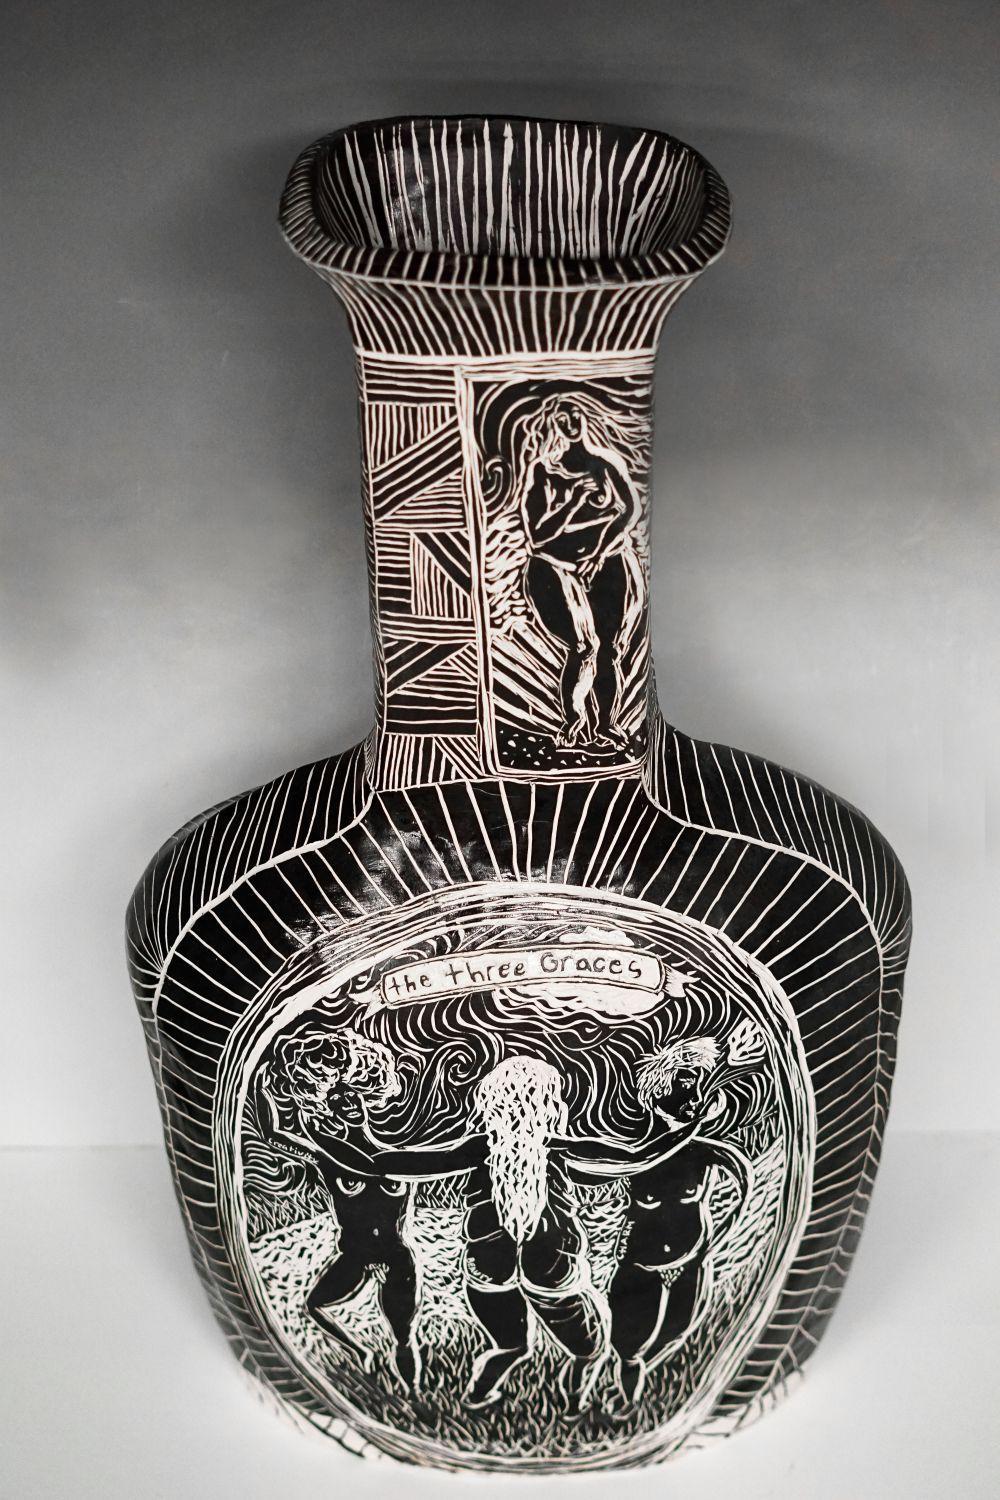 Reimagining the Divine as You
2014
Hand built and carved porcelain vase
One of a kind

This vessel is a part of the series Unsung Muses and references art historical imagery such as Botticelli’s Venus, the Minoan Snake Goddess, Hera, and the Three